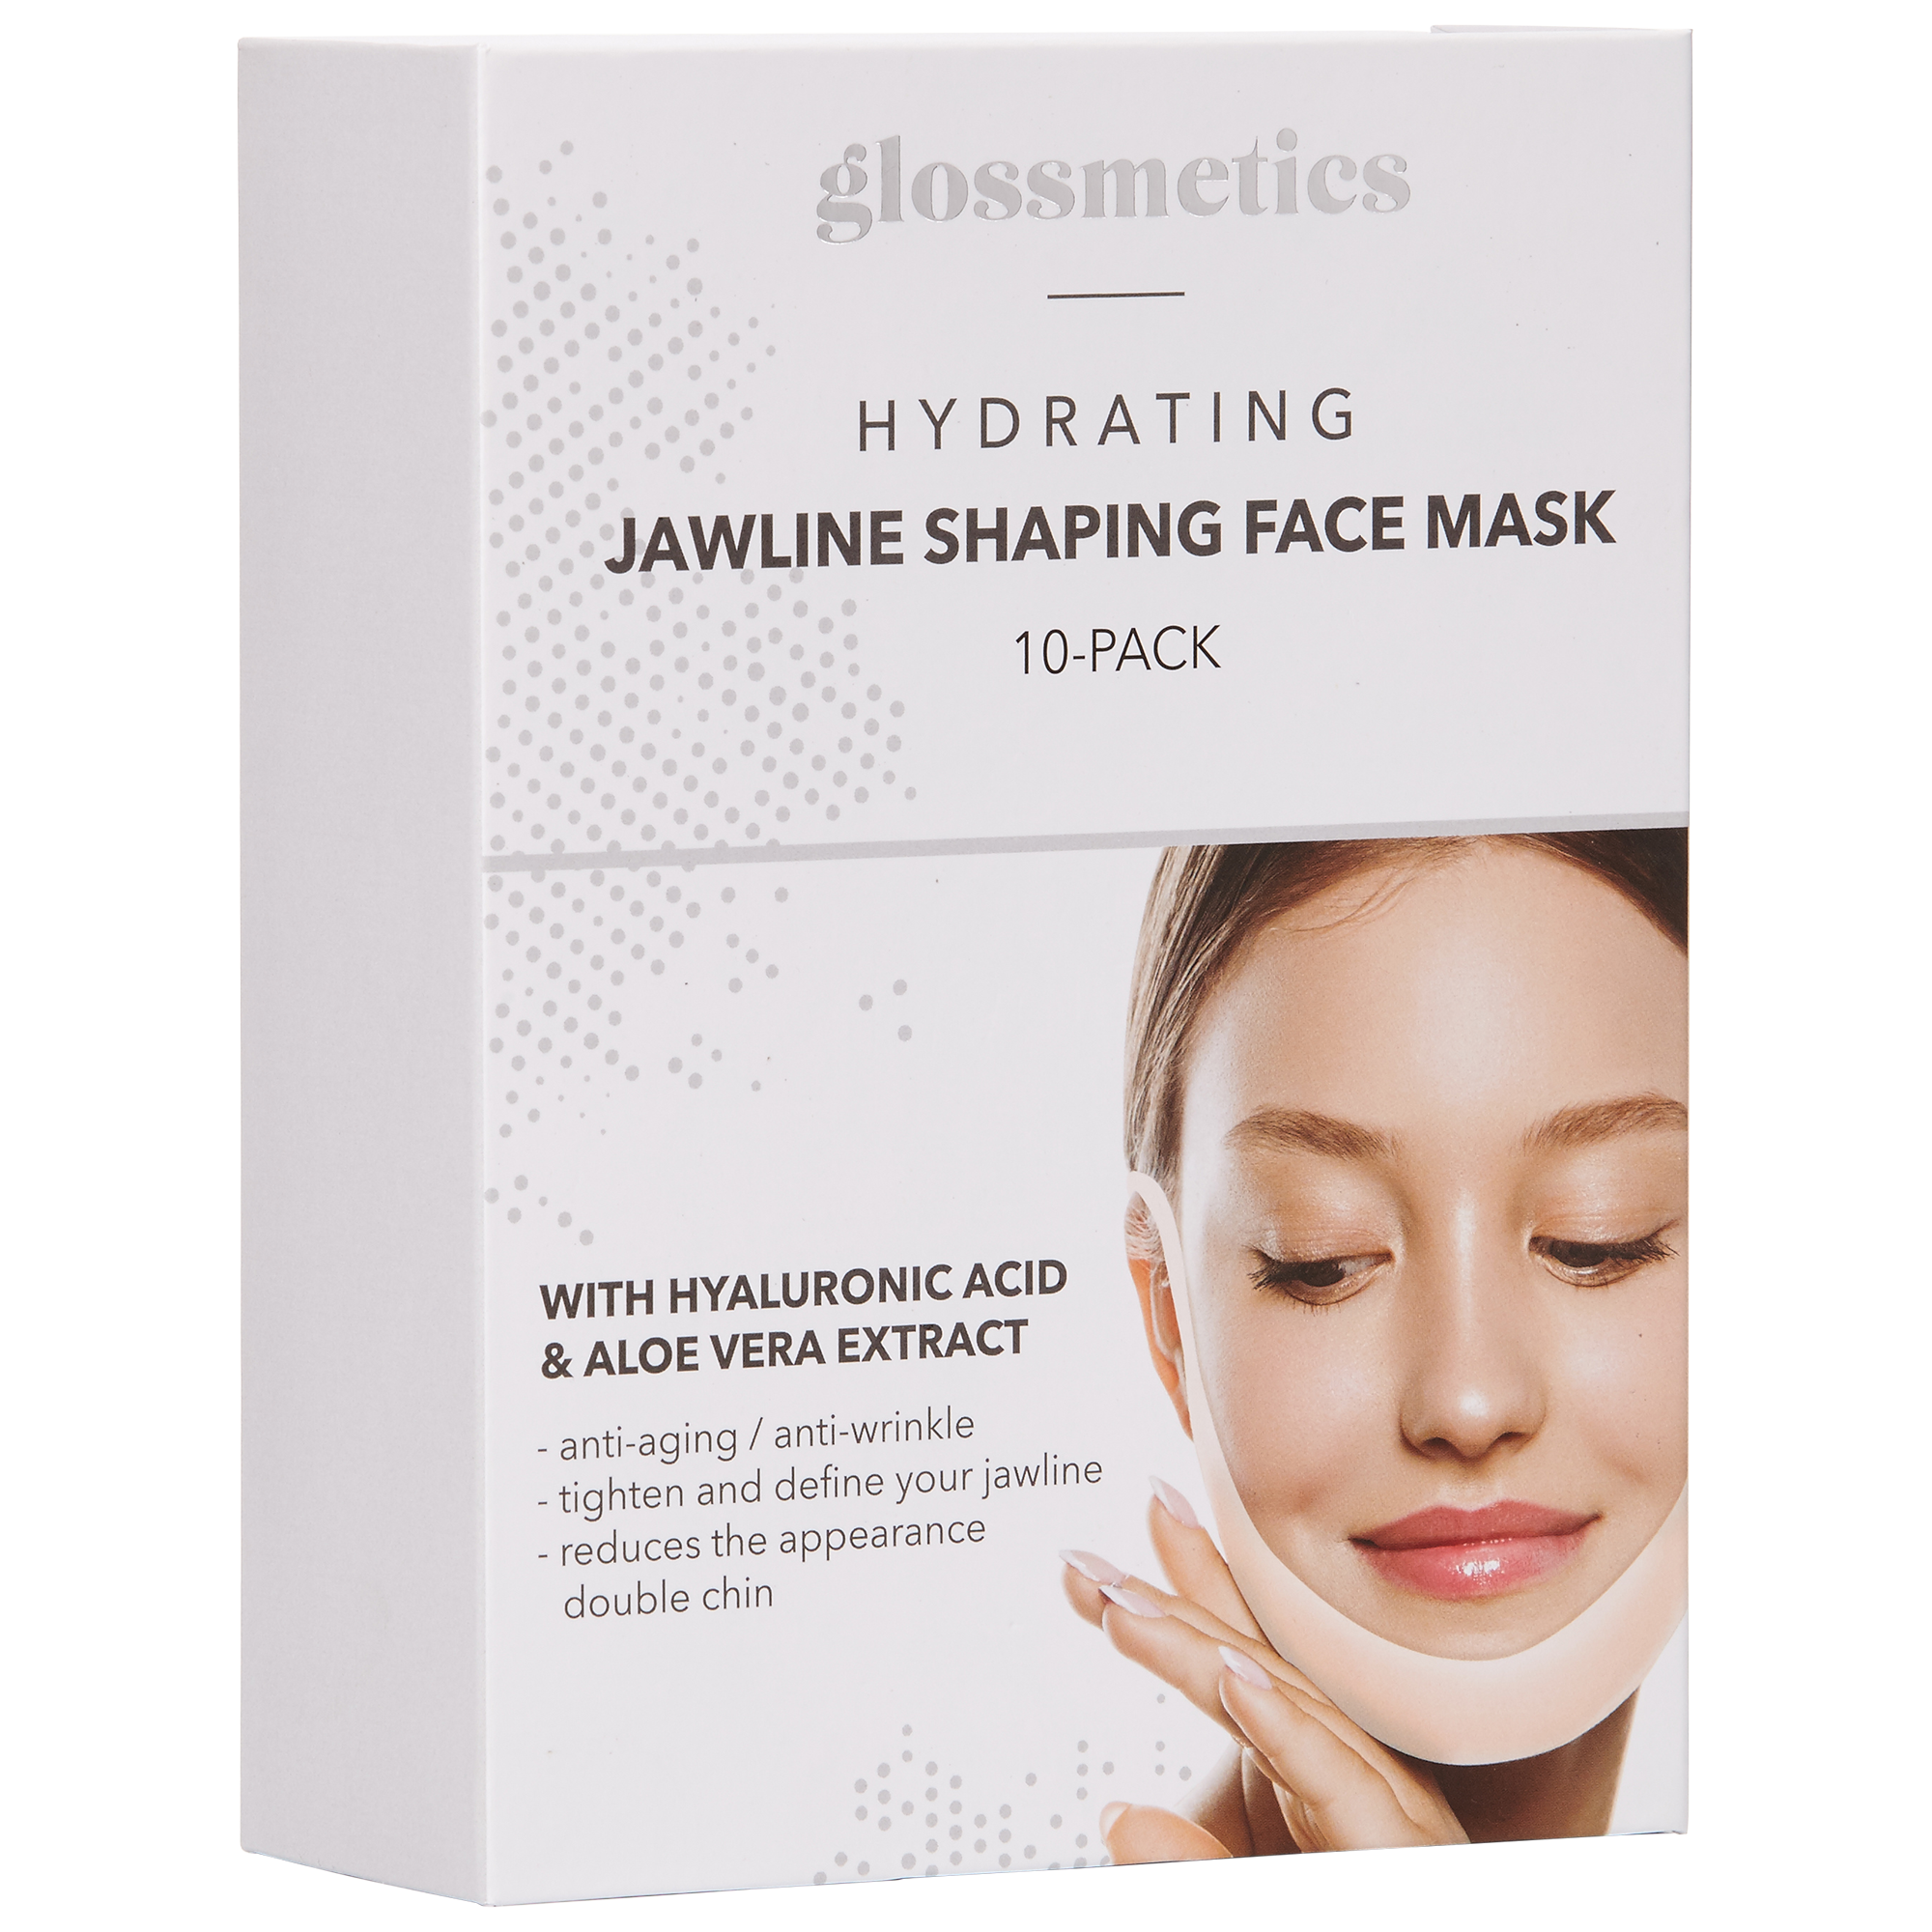 Hydrating Jawline Shaping Face Masks - 10-Pack